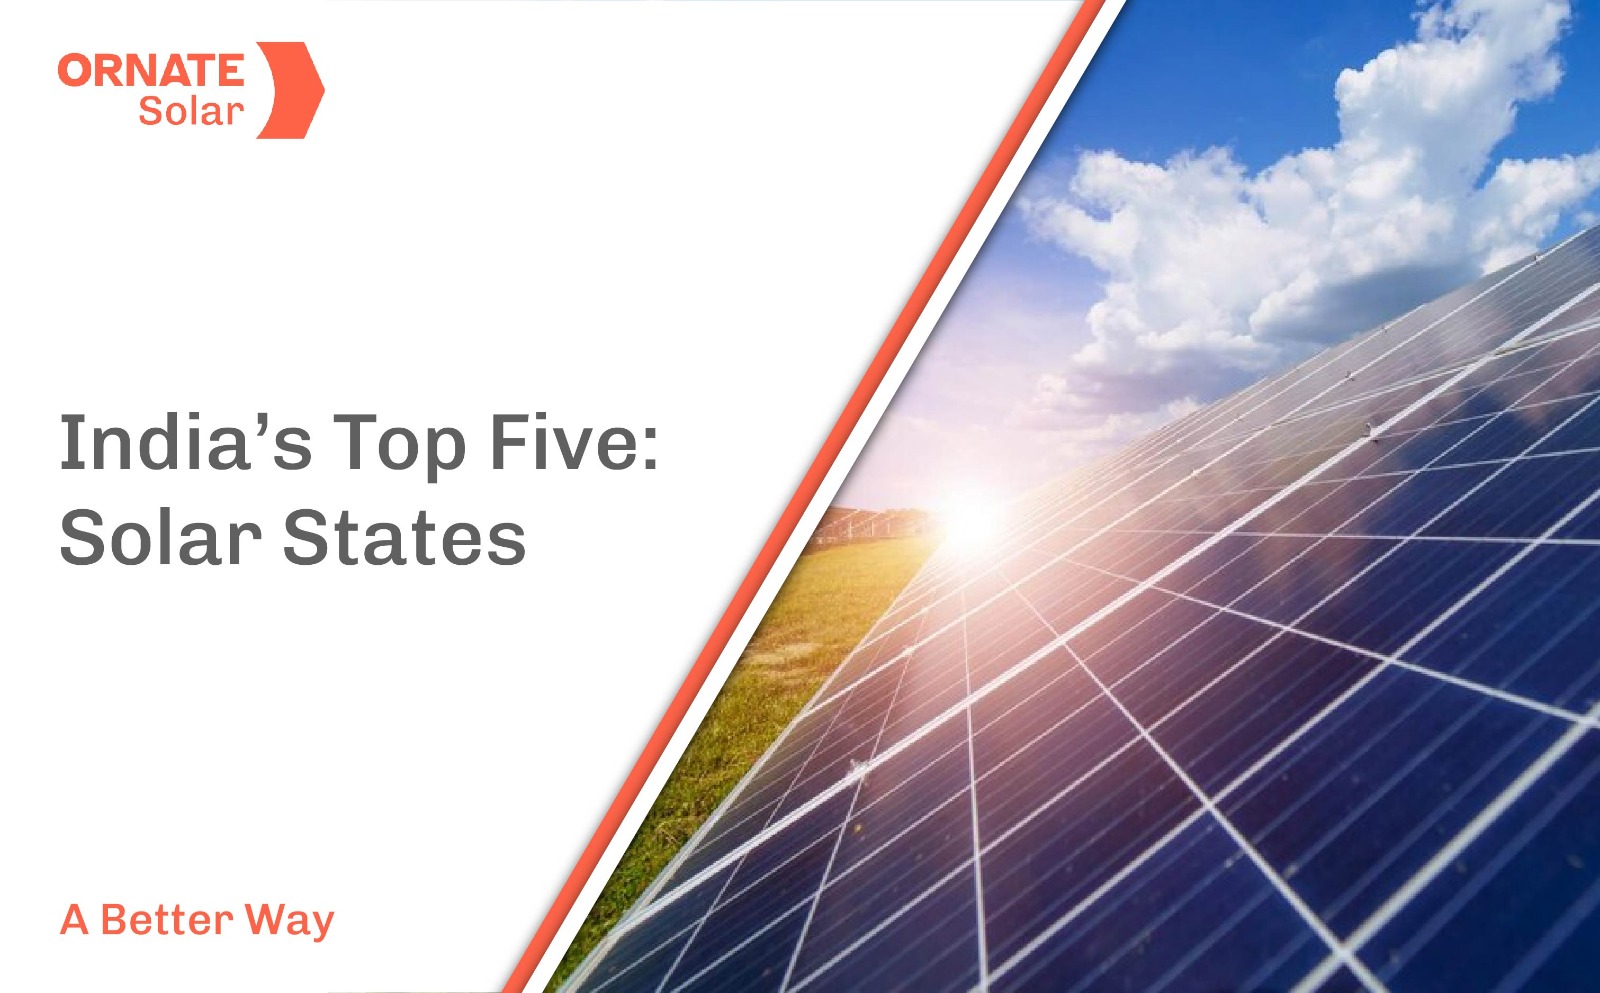 Tell your state legislators to support rooftop solar